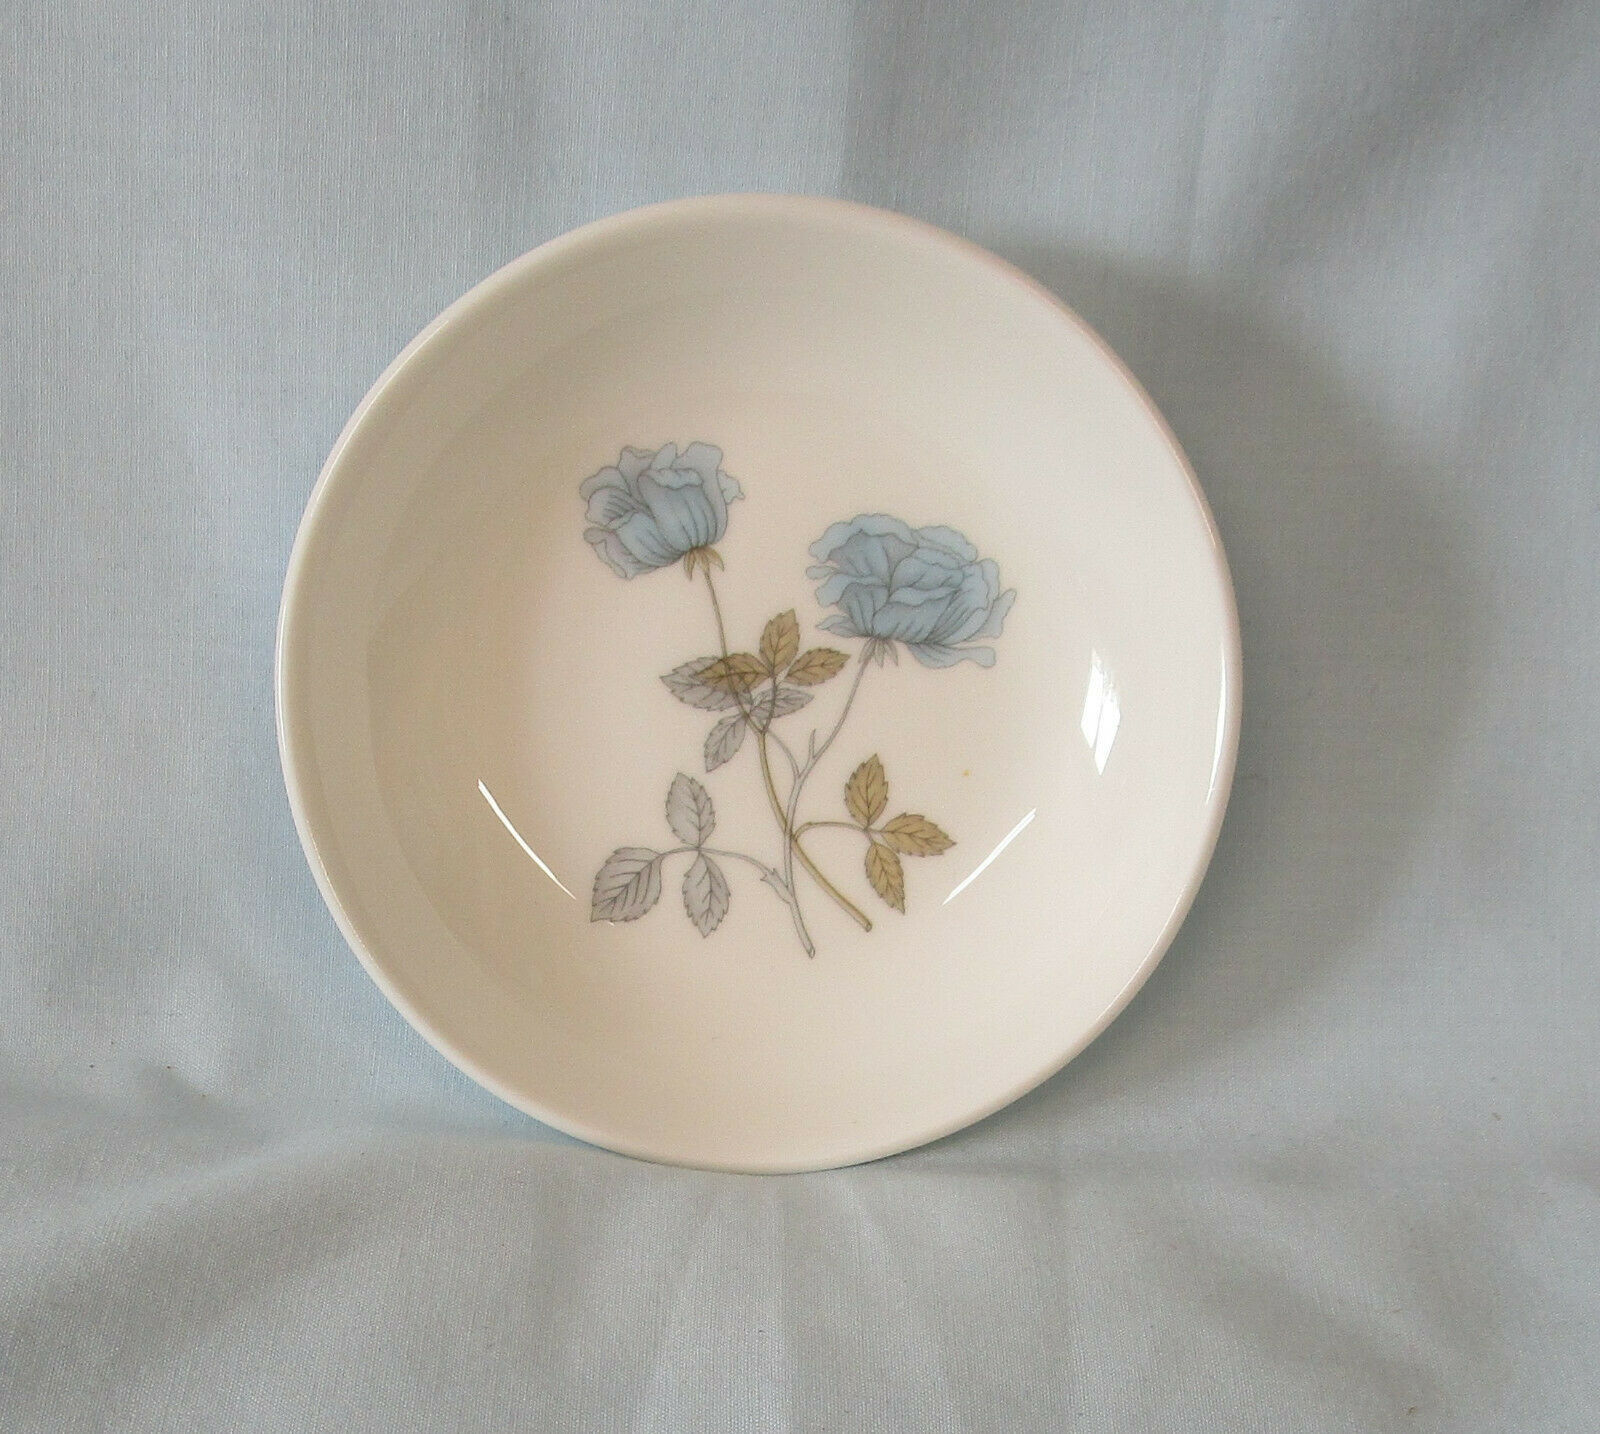 Primary image for Wedgwood Iced Rose Coaster